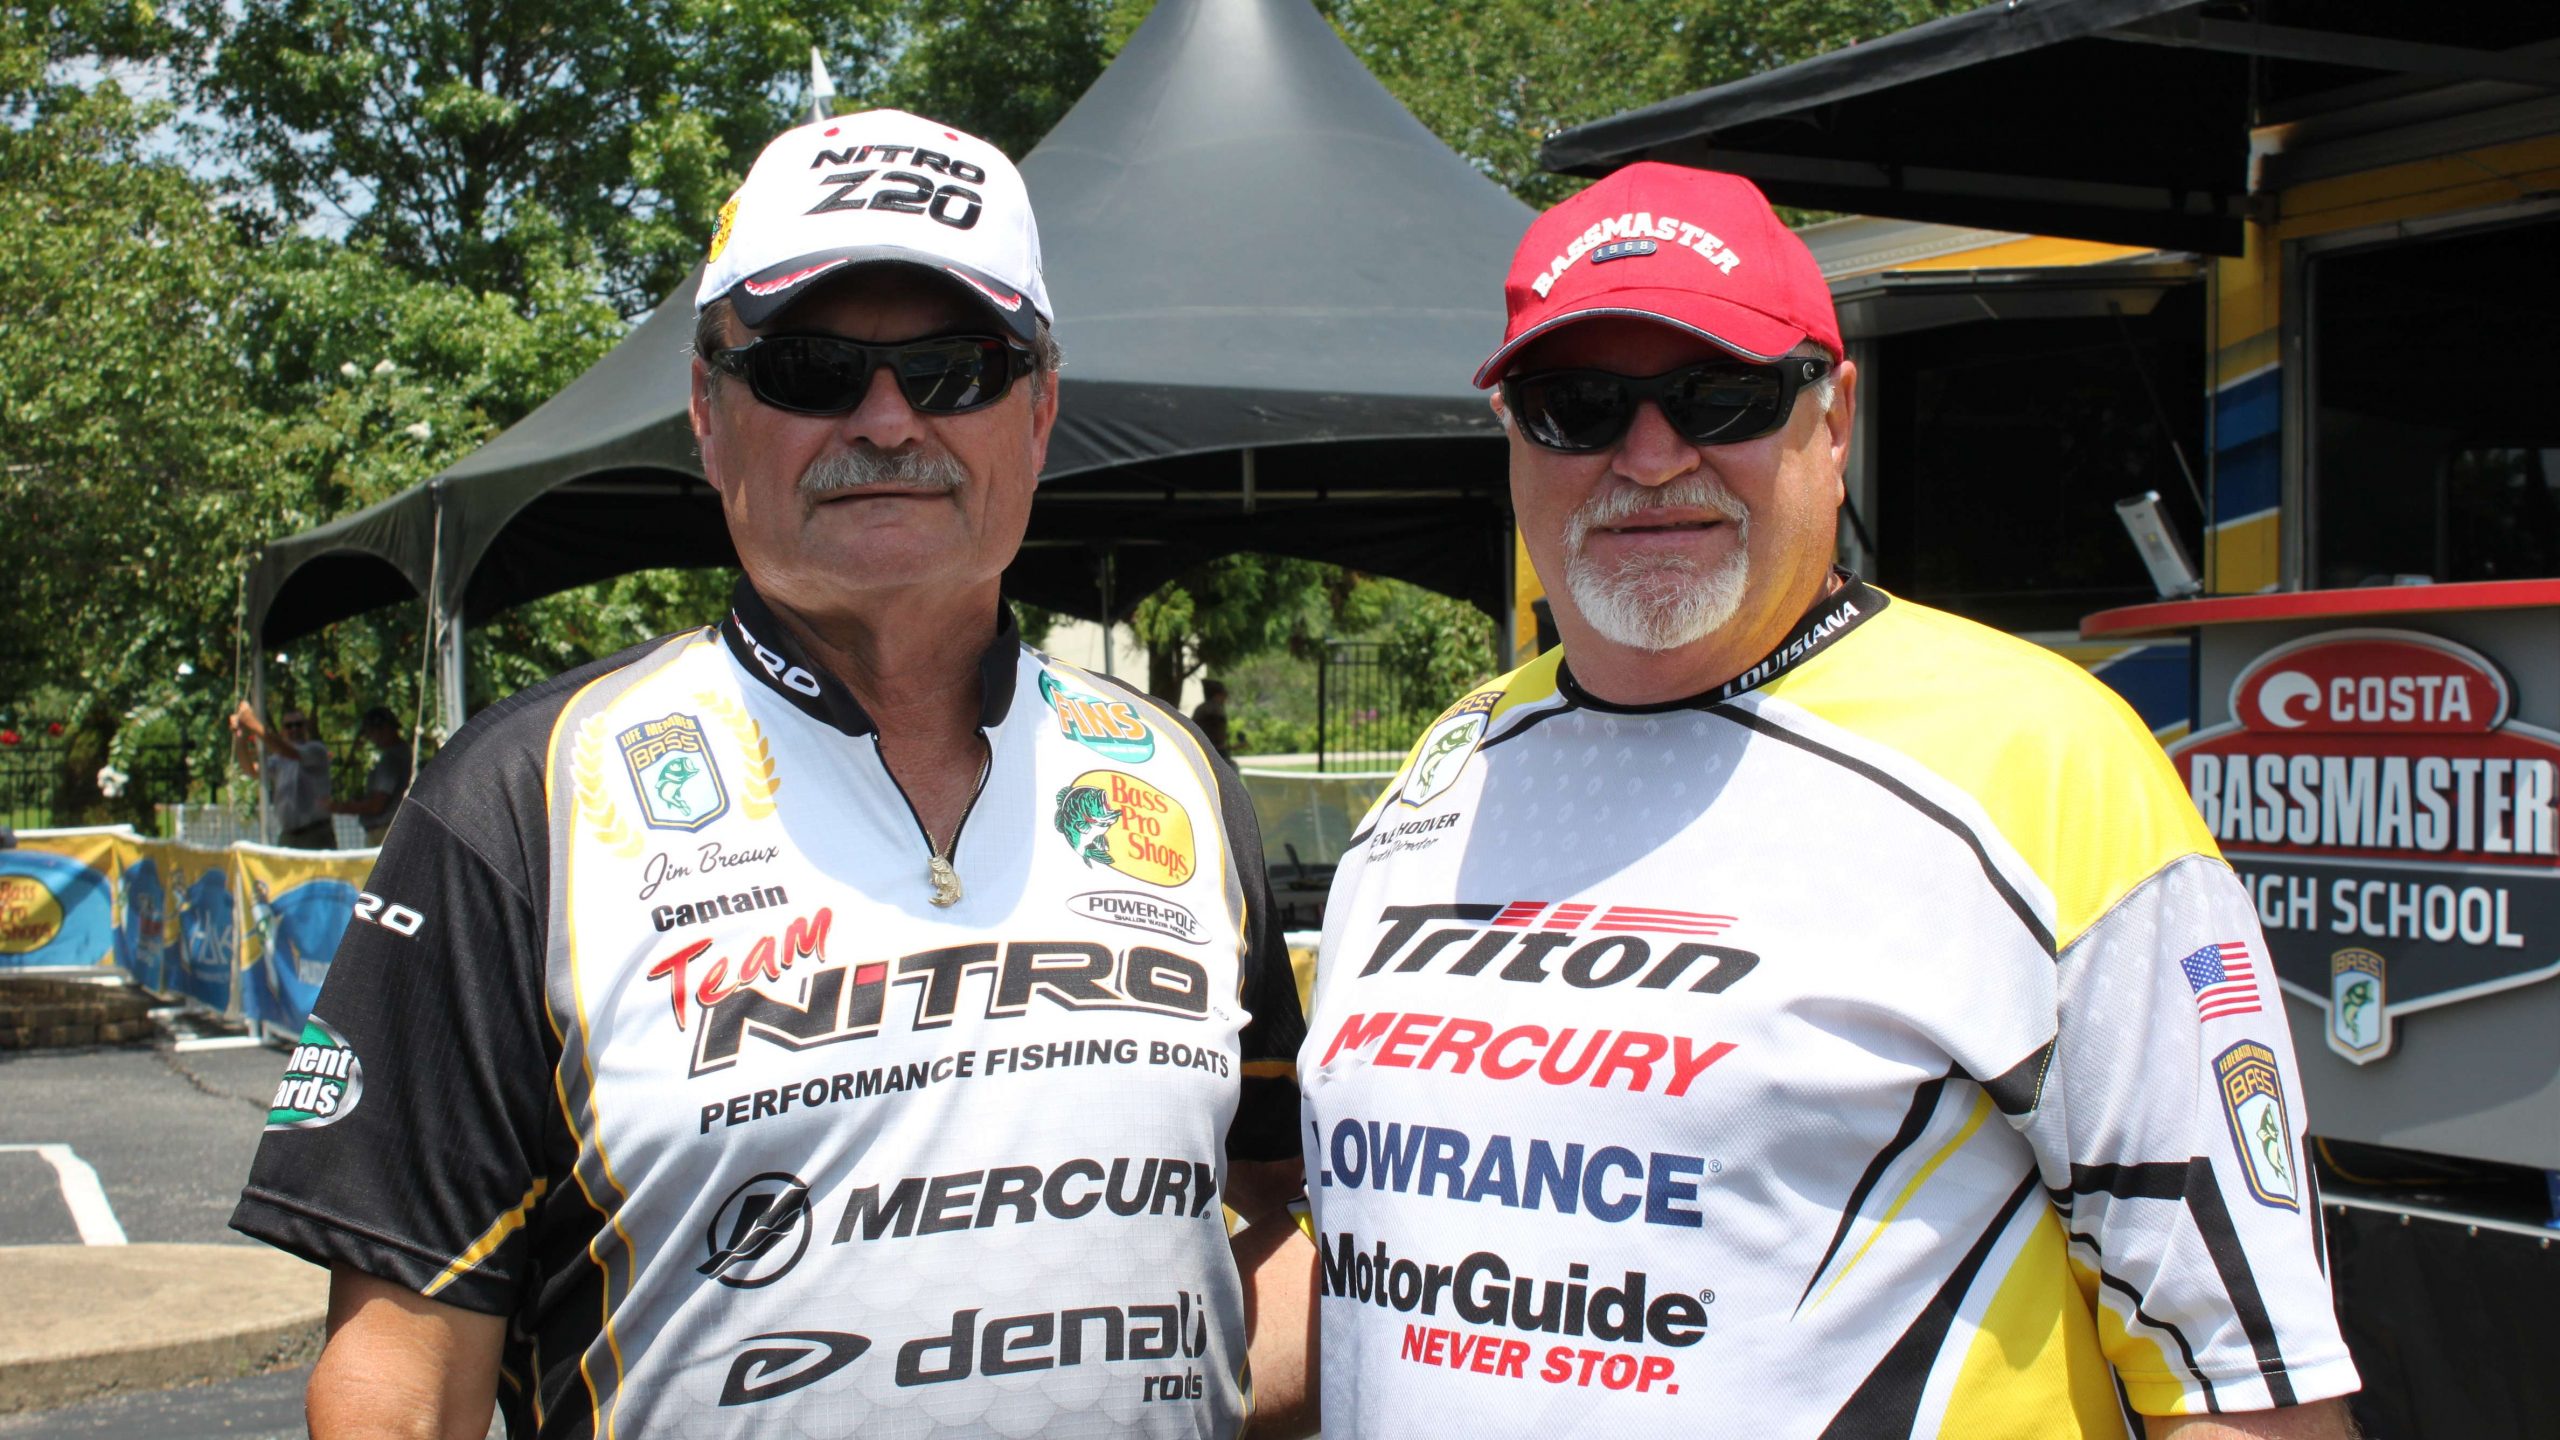 Jim Breaux and Gene Hoover of Louisiana were in the crowd for the 2016 Costa Bassmaster Junior Championships in Huntingdon, Tenn. Hoover is the B.A.S.S. Youth Director, and Breaux is director of the Junior Southwest Louisiana Bassmaster club whose members placed fifth in the tournament.